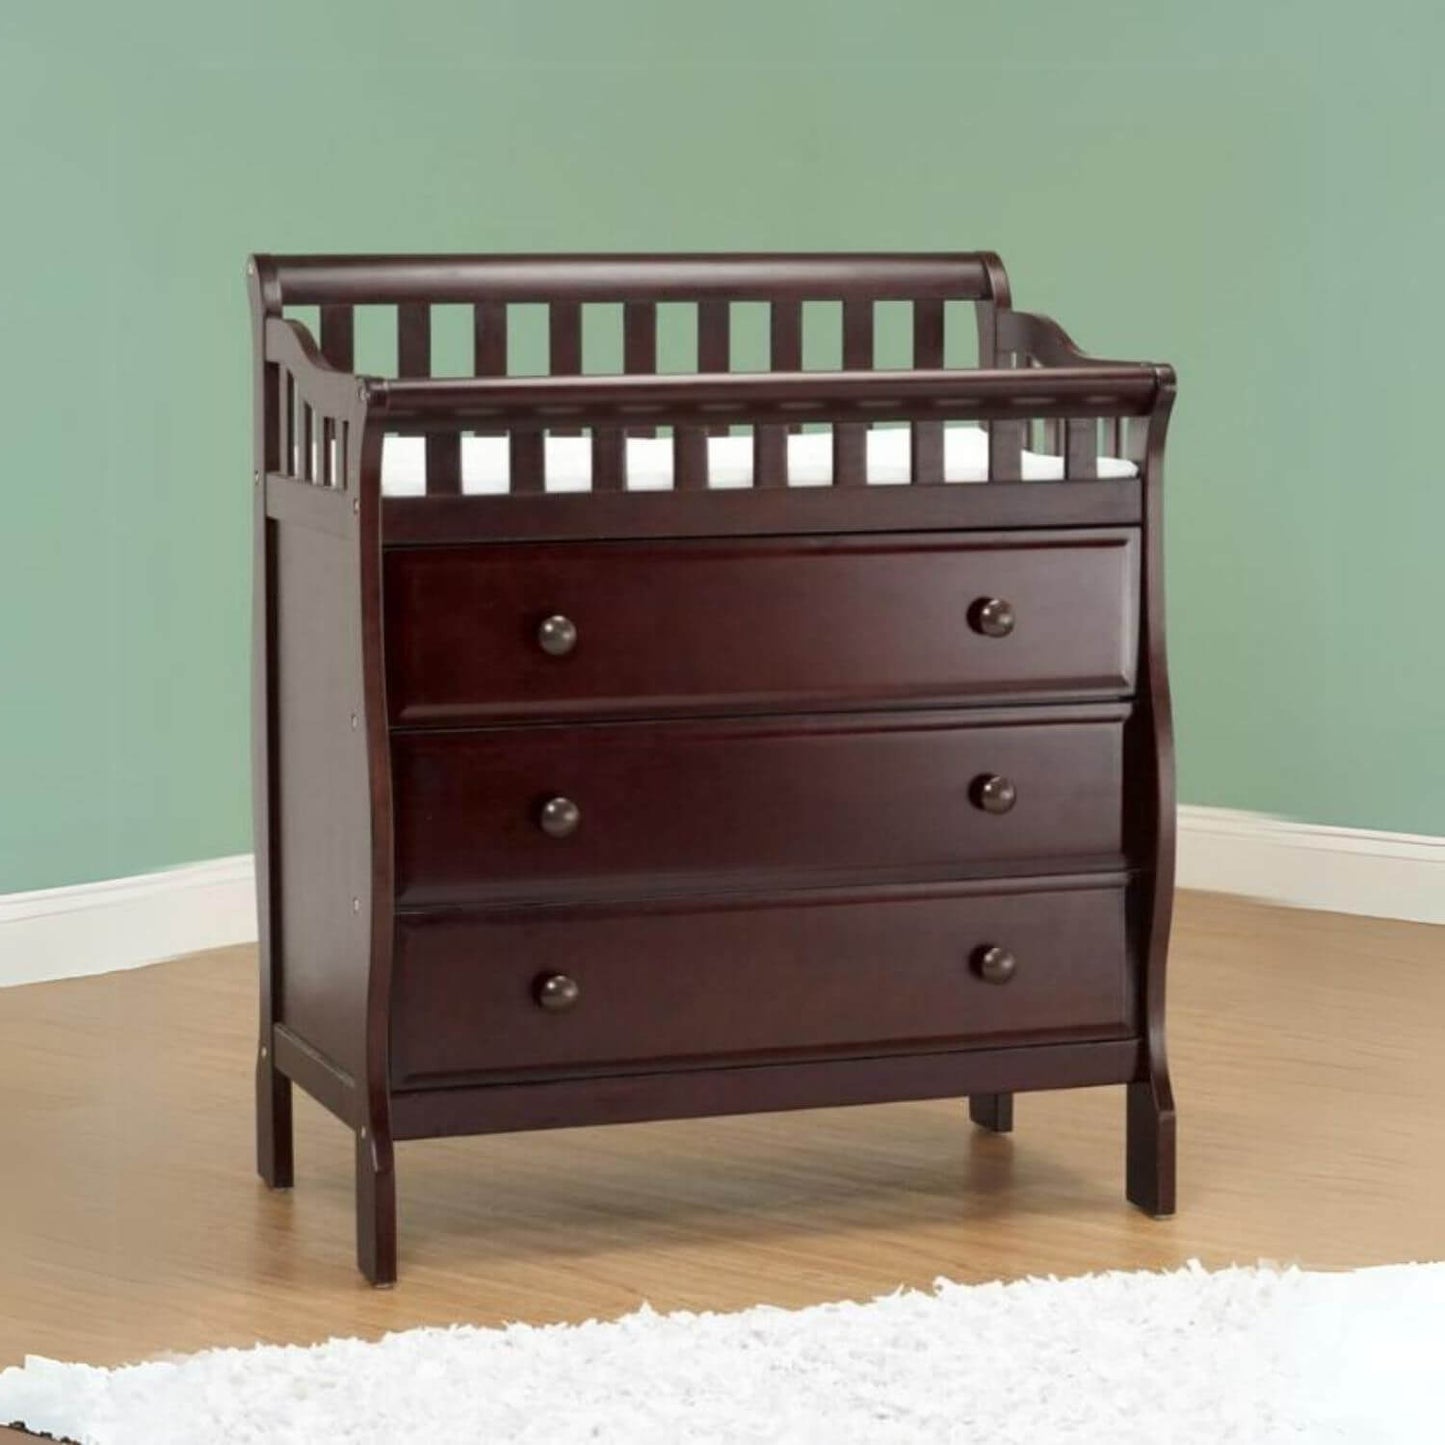 Orbelle Oneman Changing Table Espresso - Lifestyle